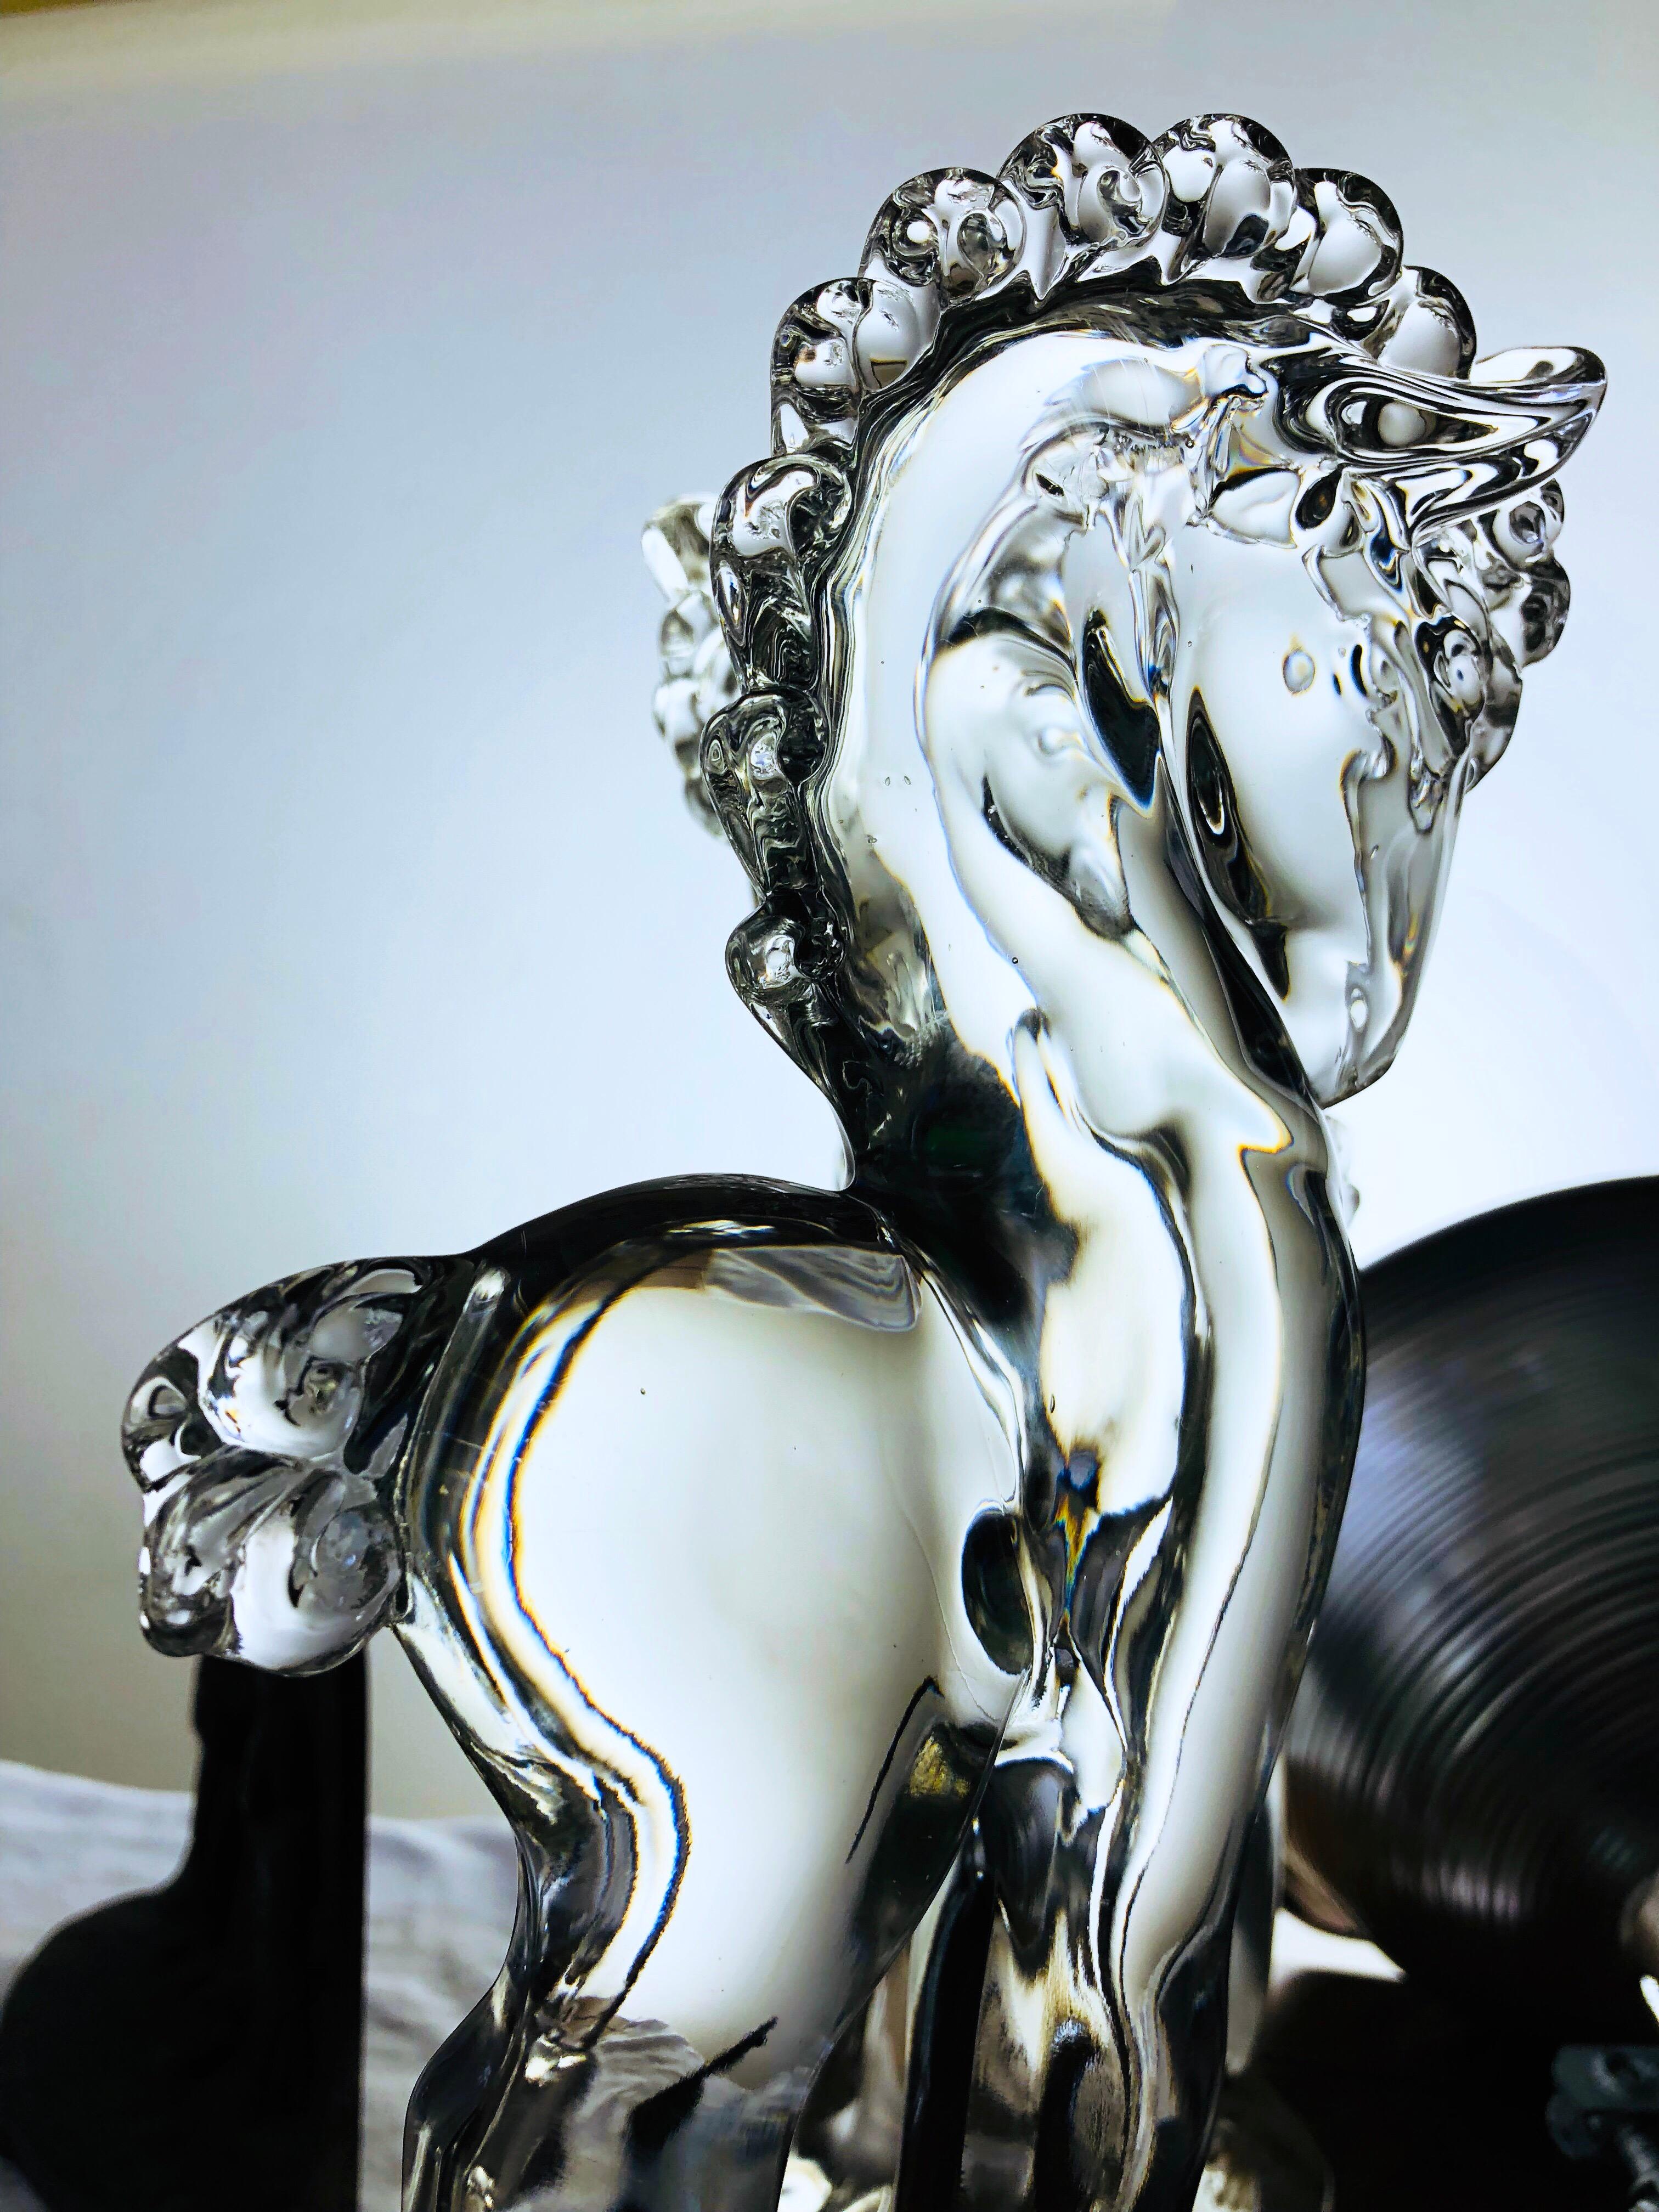 This beautiful glass horse sculpture was produced by Paden City Manufacturing Company, founded in Paden City West Virginia in 1916. This company survived only about 30 years, going out of business in 1951. Their production is perhaps the most